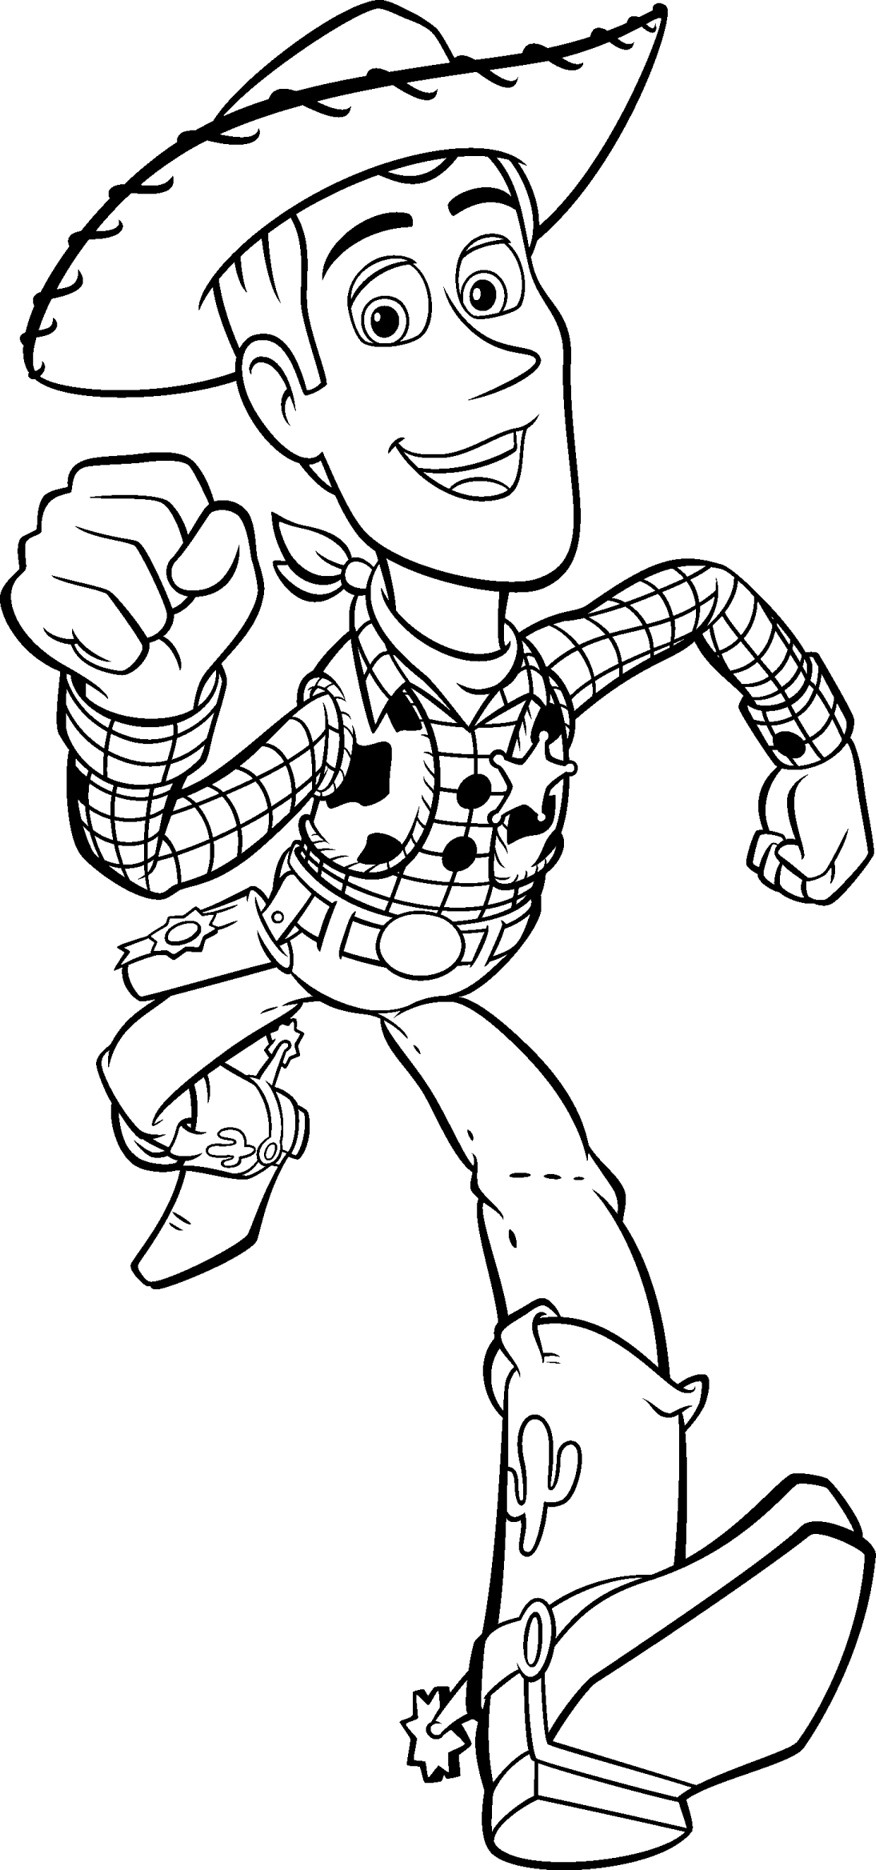 Free Disney Coloring Pages For Kids
 Free Printable Toy Story Coloring Pages For Kids